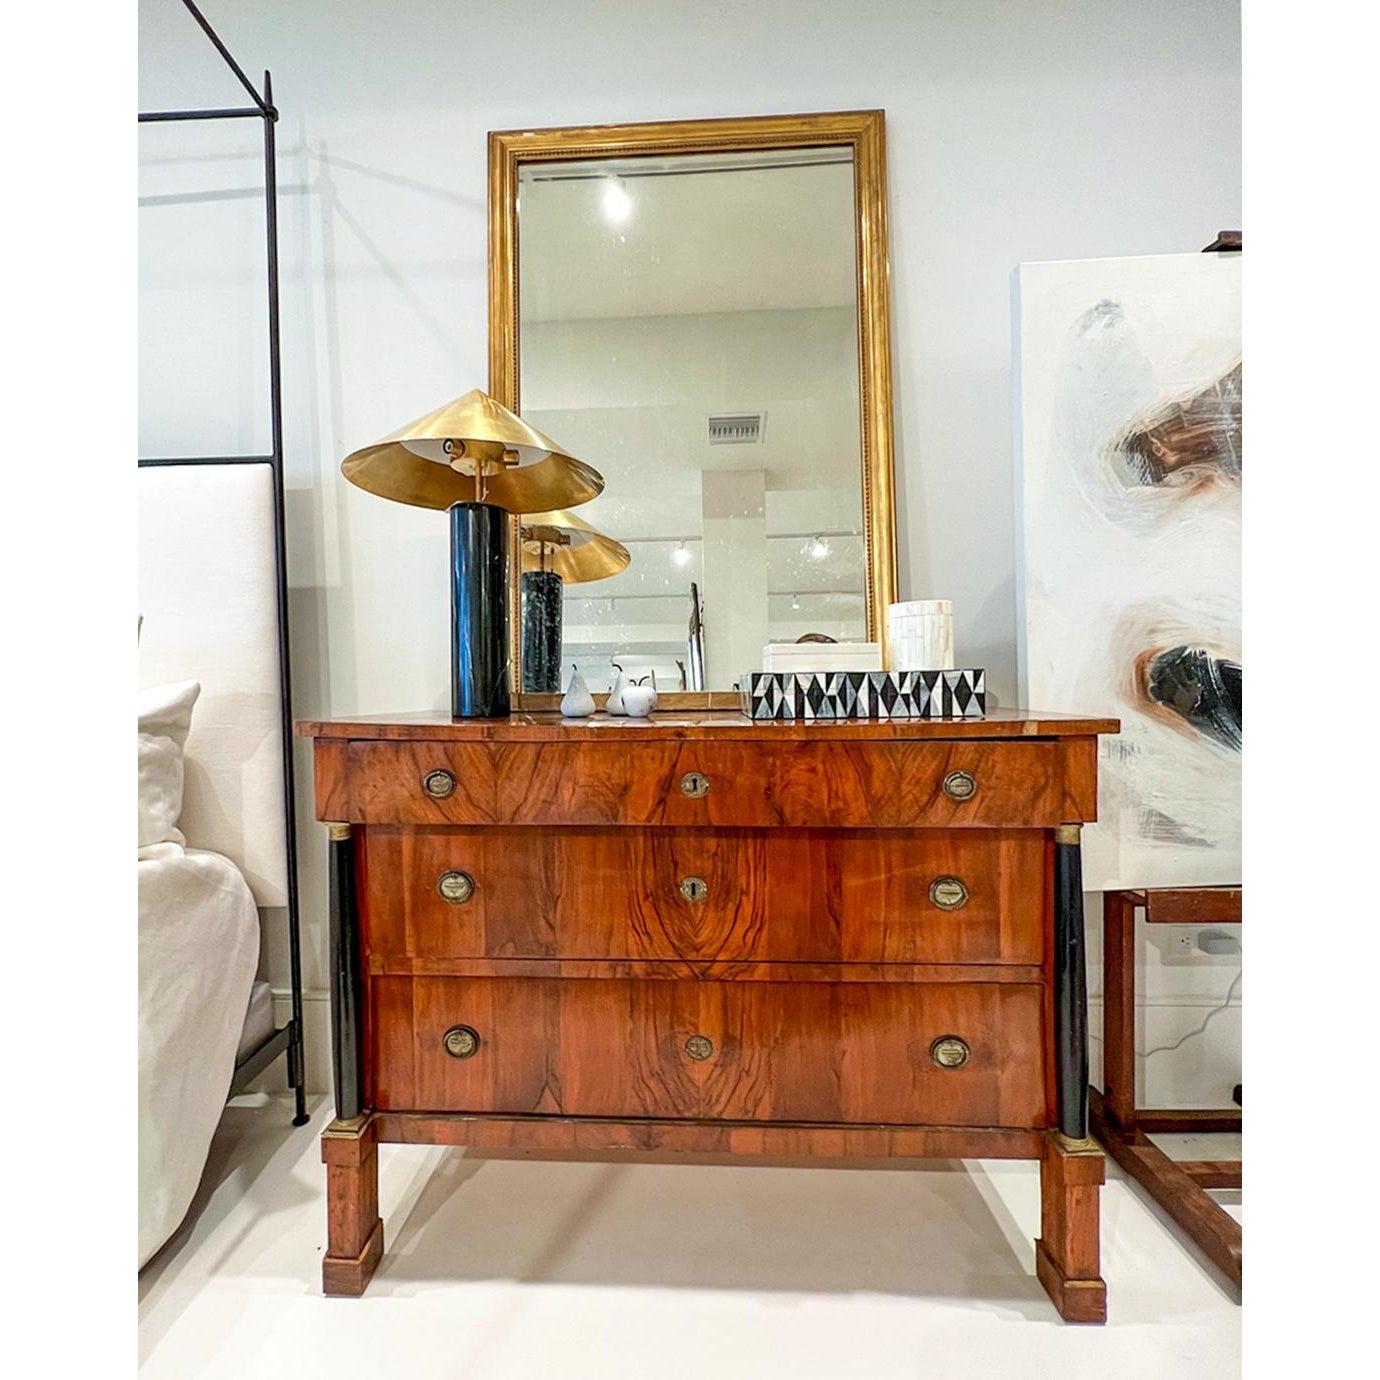 This is a beautiful Empire commode; a rare find. Warm walnut with book matching on the front drawers accented with bronze fittings.
It also has black columns on either side of the drawers topped with bronze capitals.
 